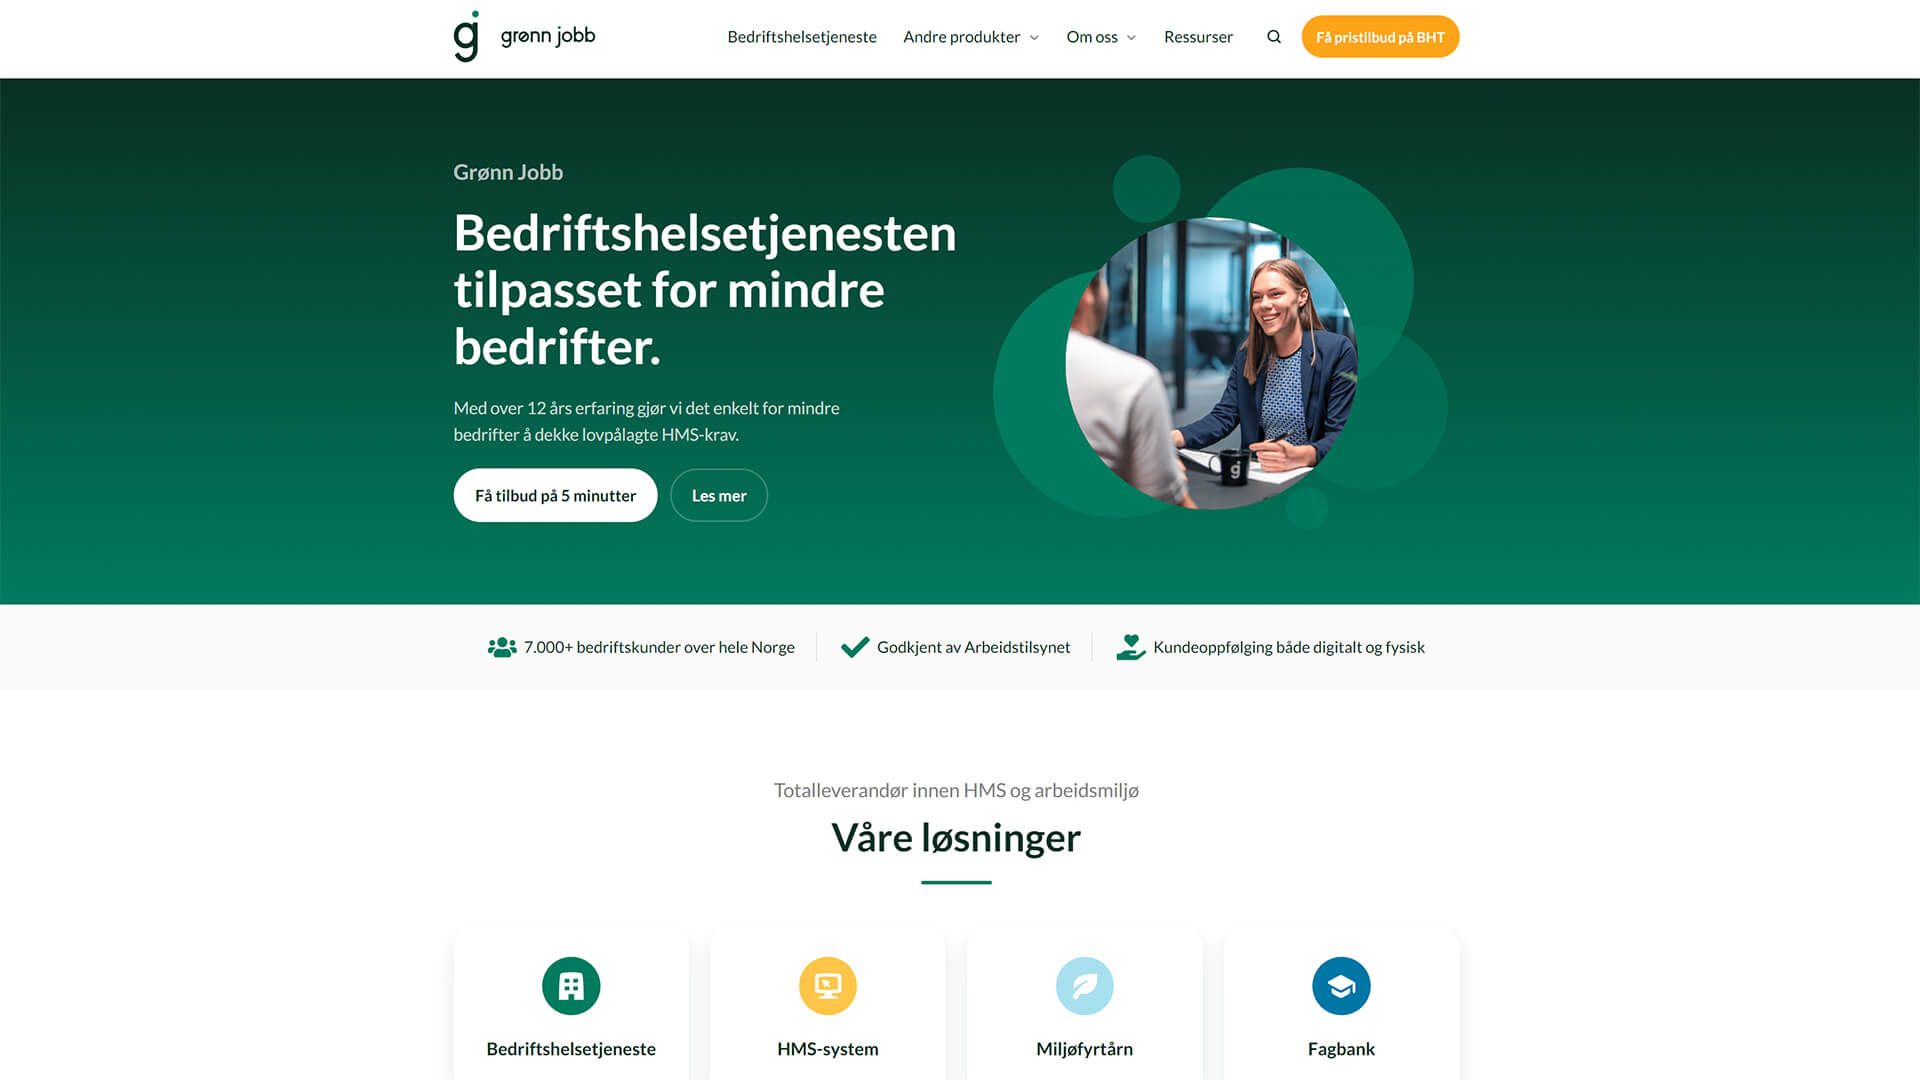 The beautiful gronnjobb.no website created with Act3 on the HubSpot CMS